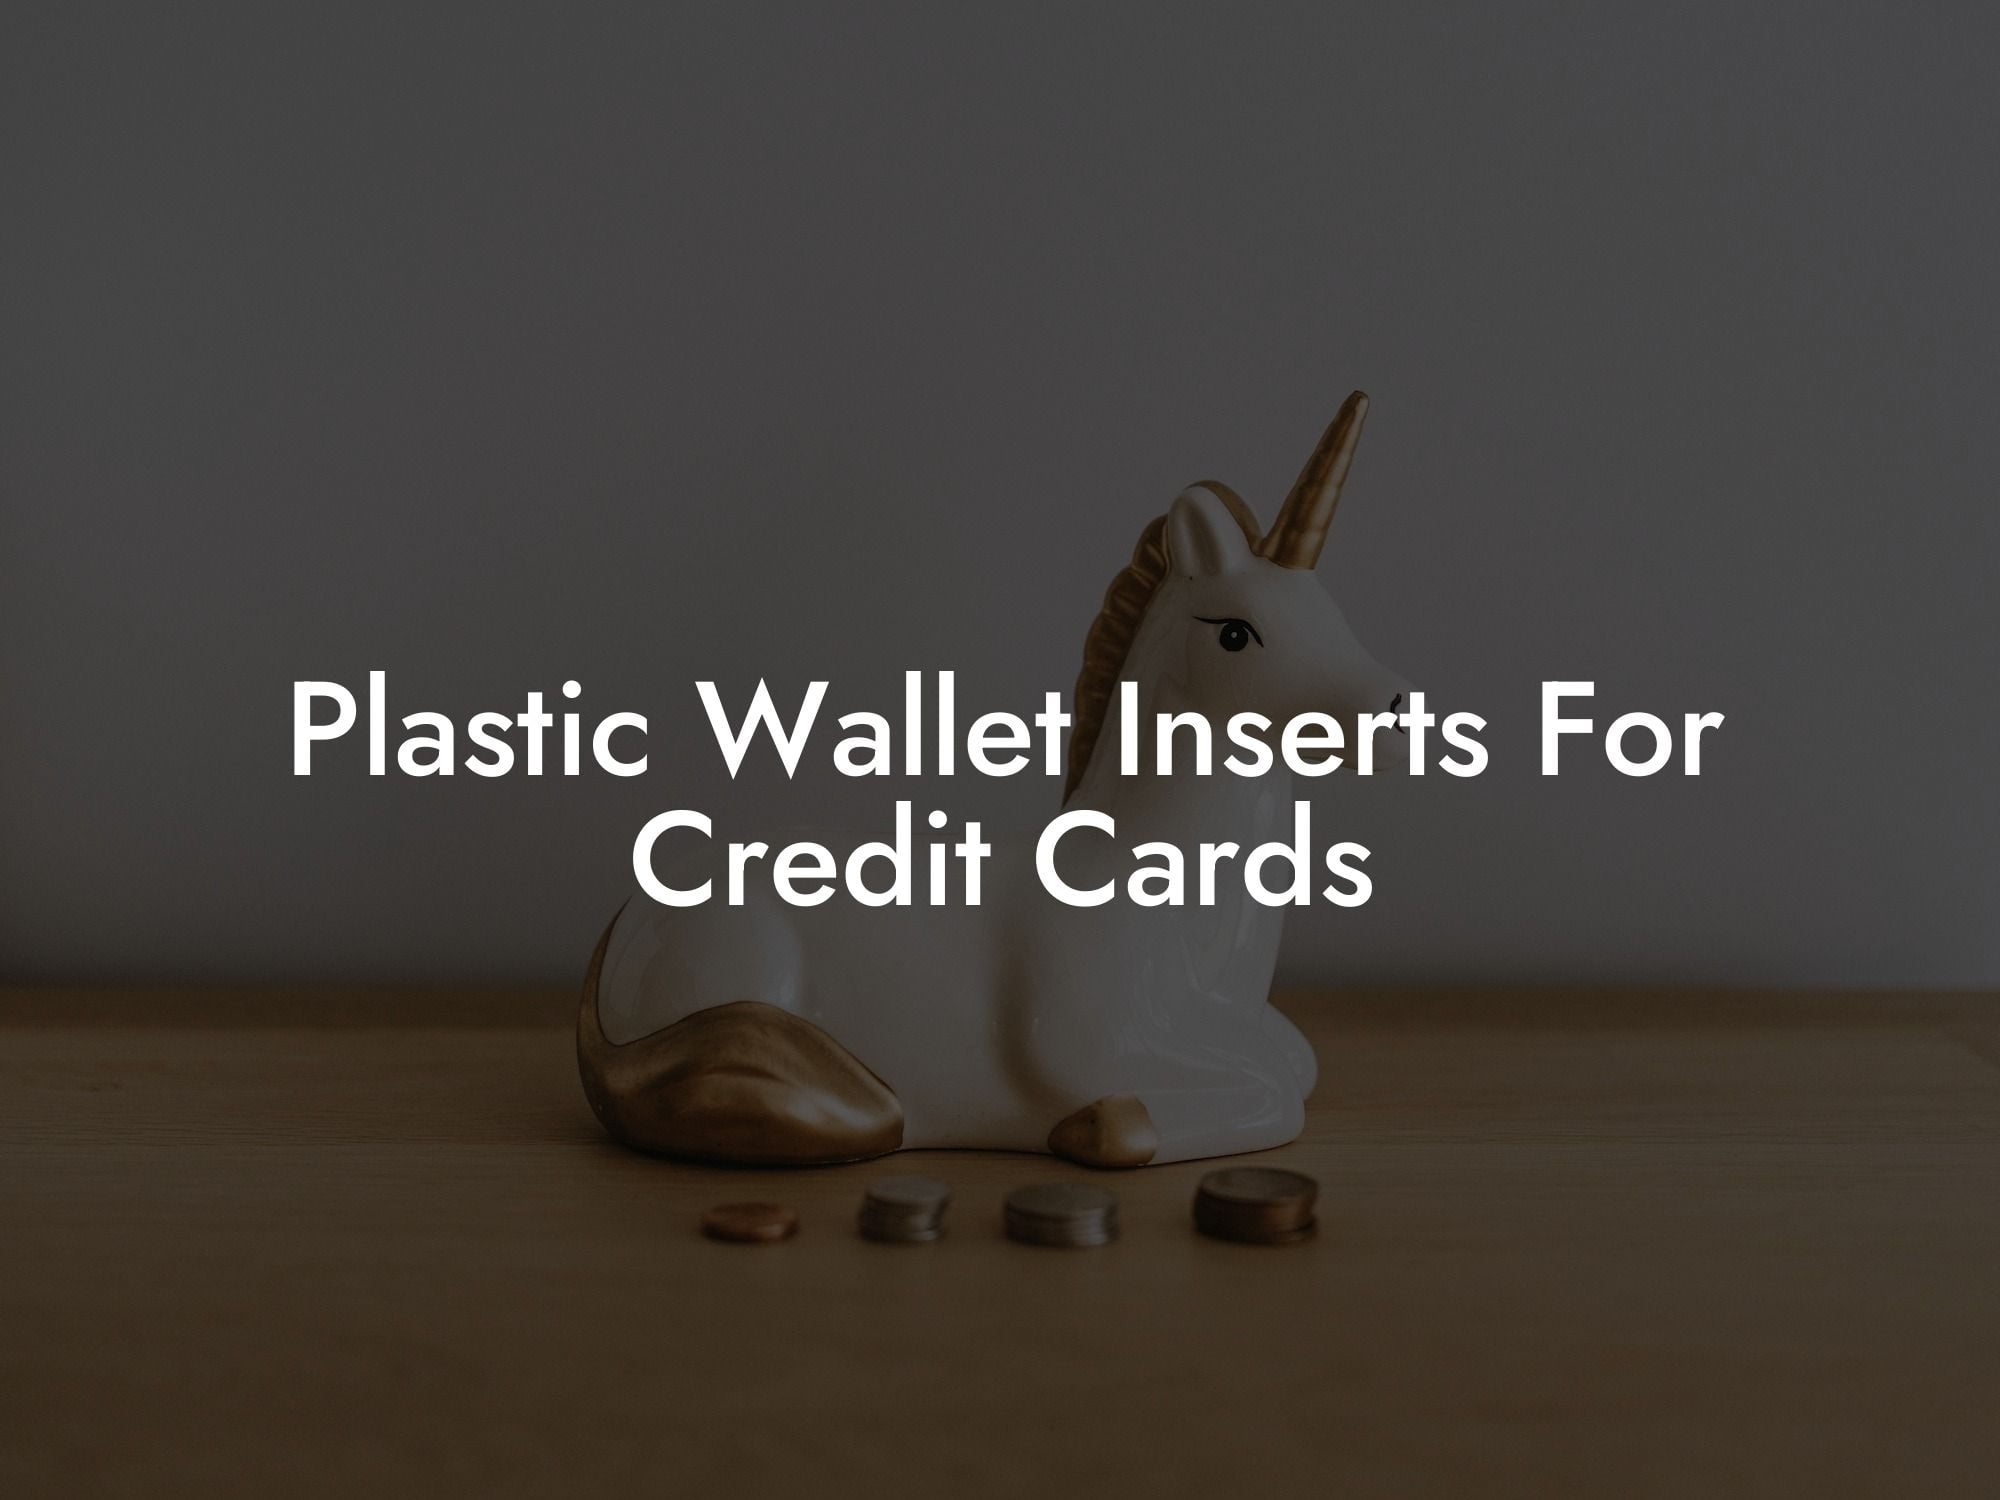 Plastic Wallet Inserts For Credit Cards